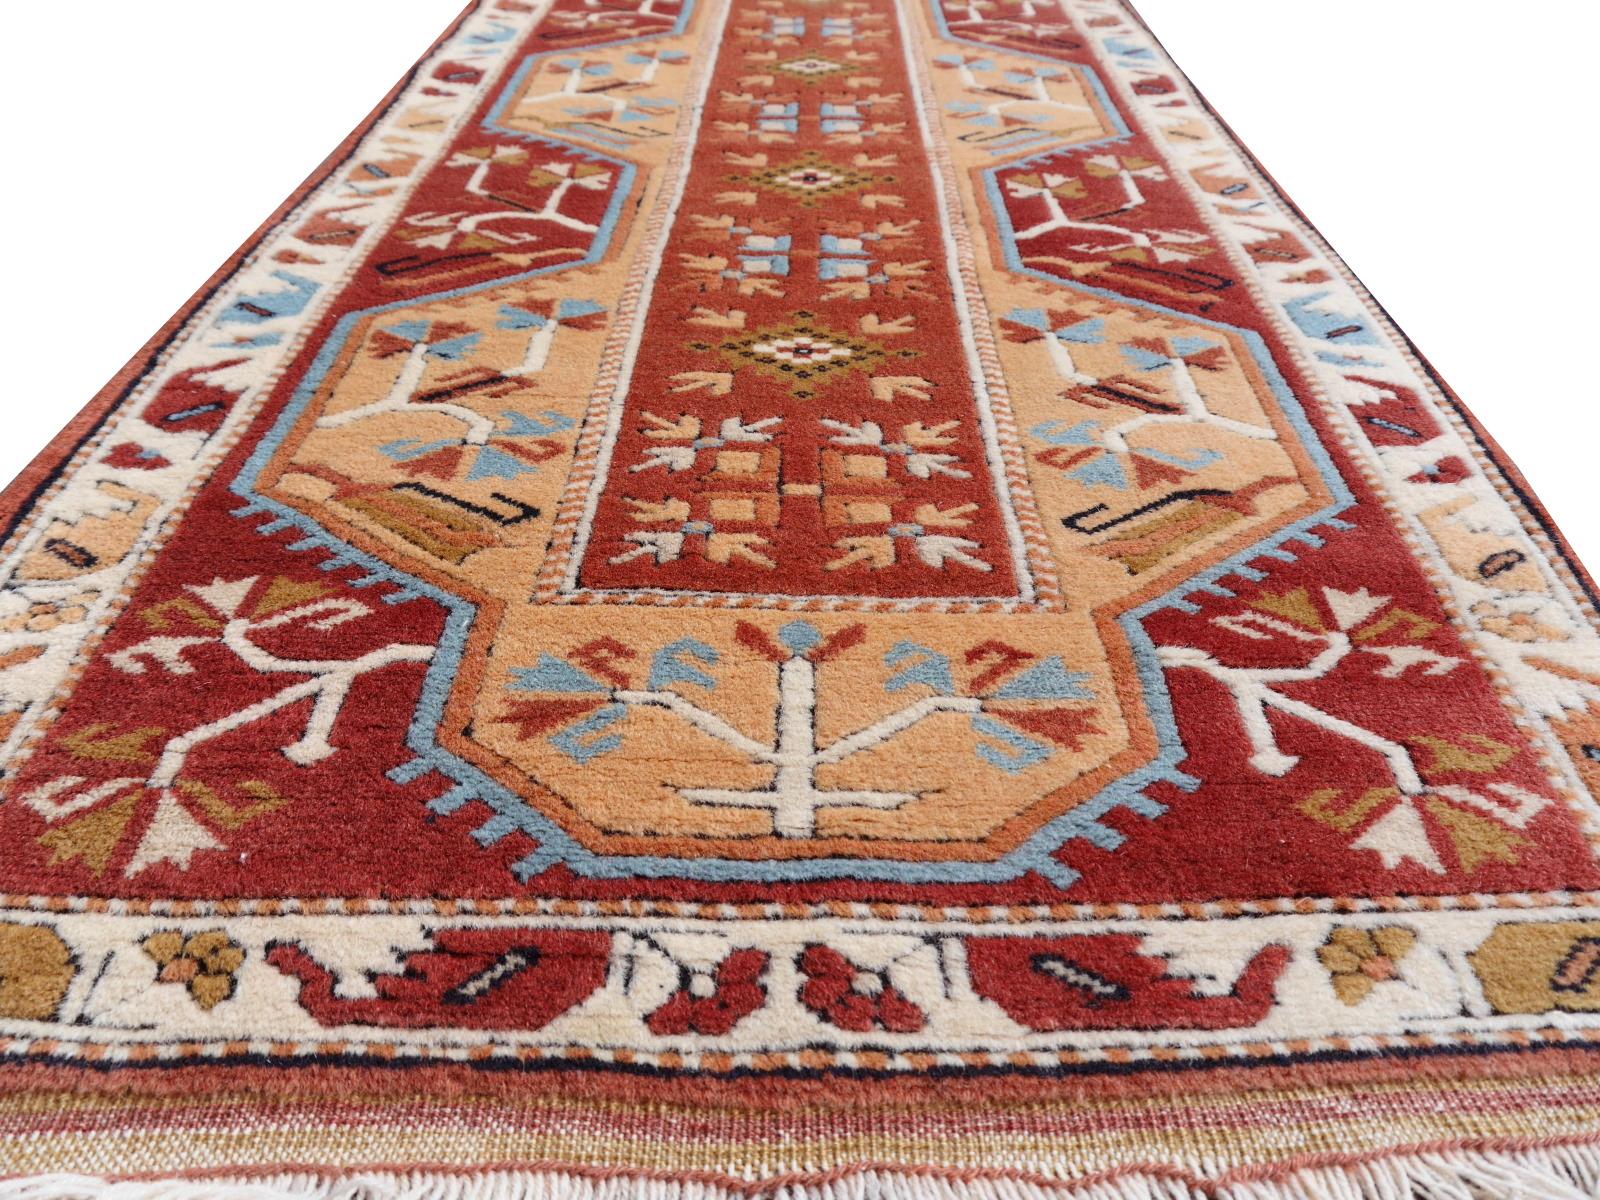 Stunning stairway or hallway runner wool rug, hand-knotted in Turkey.

Oushak design rugs and carpets are mainly made of fine, hand-spun wool, 
This wonderful and stunning example comes from Wastern Anatolia.

This rug was made in a village